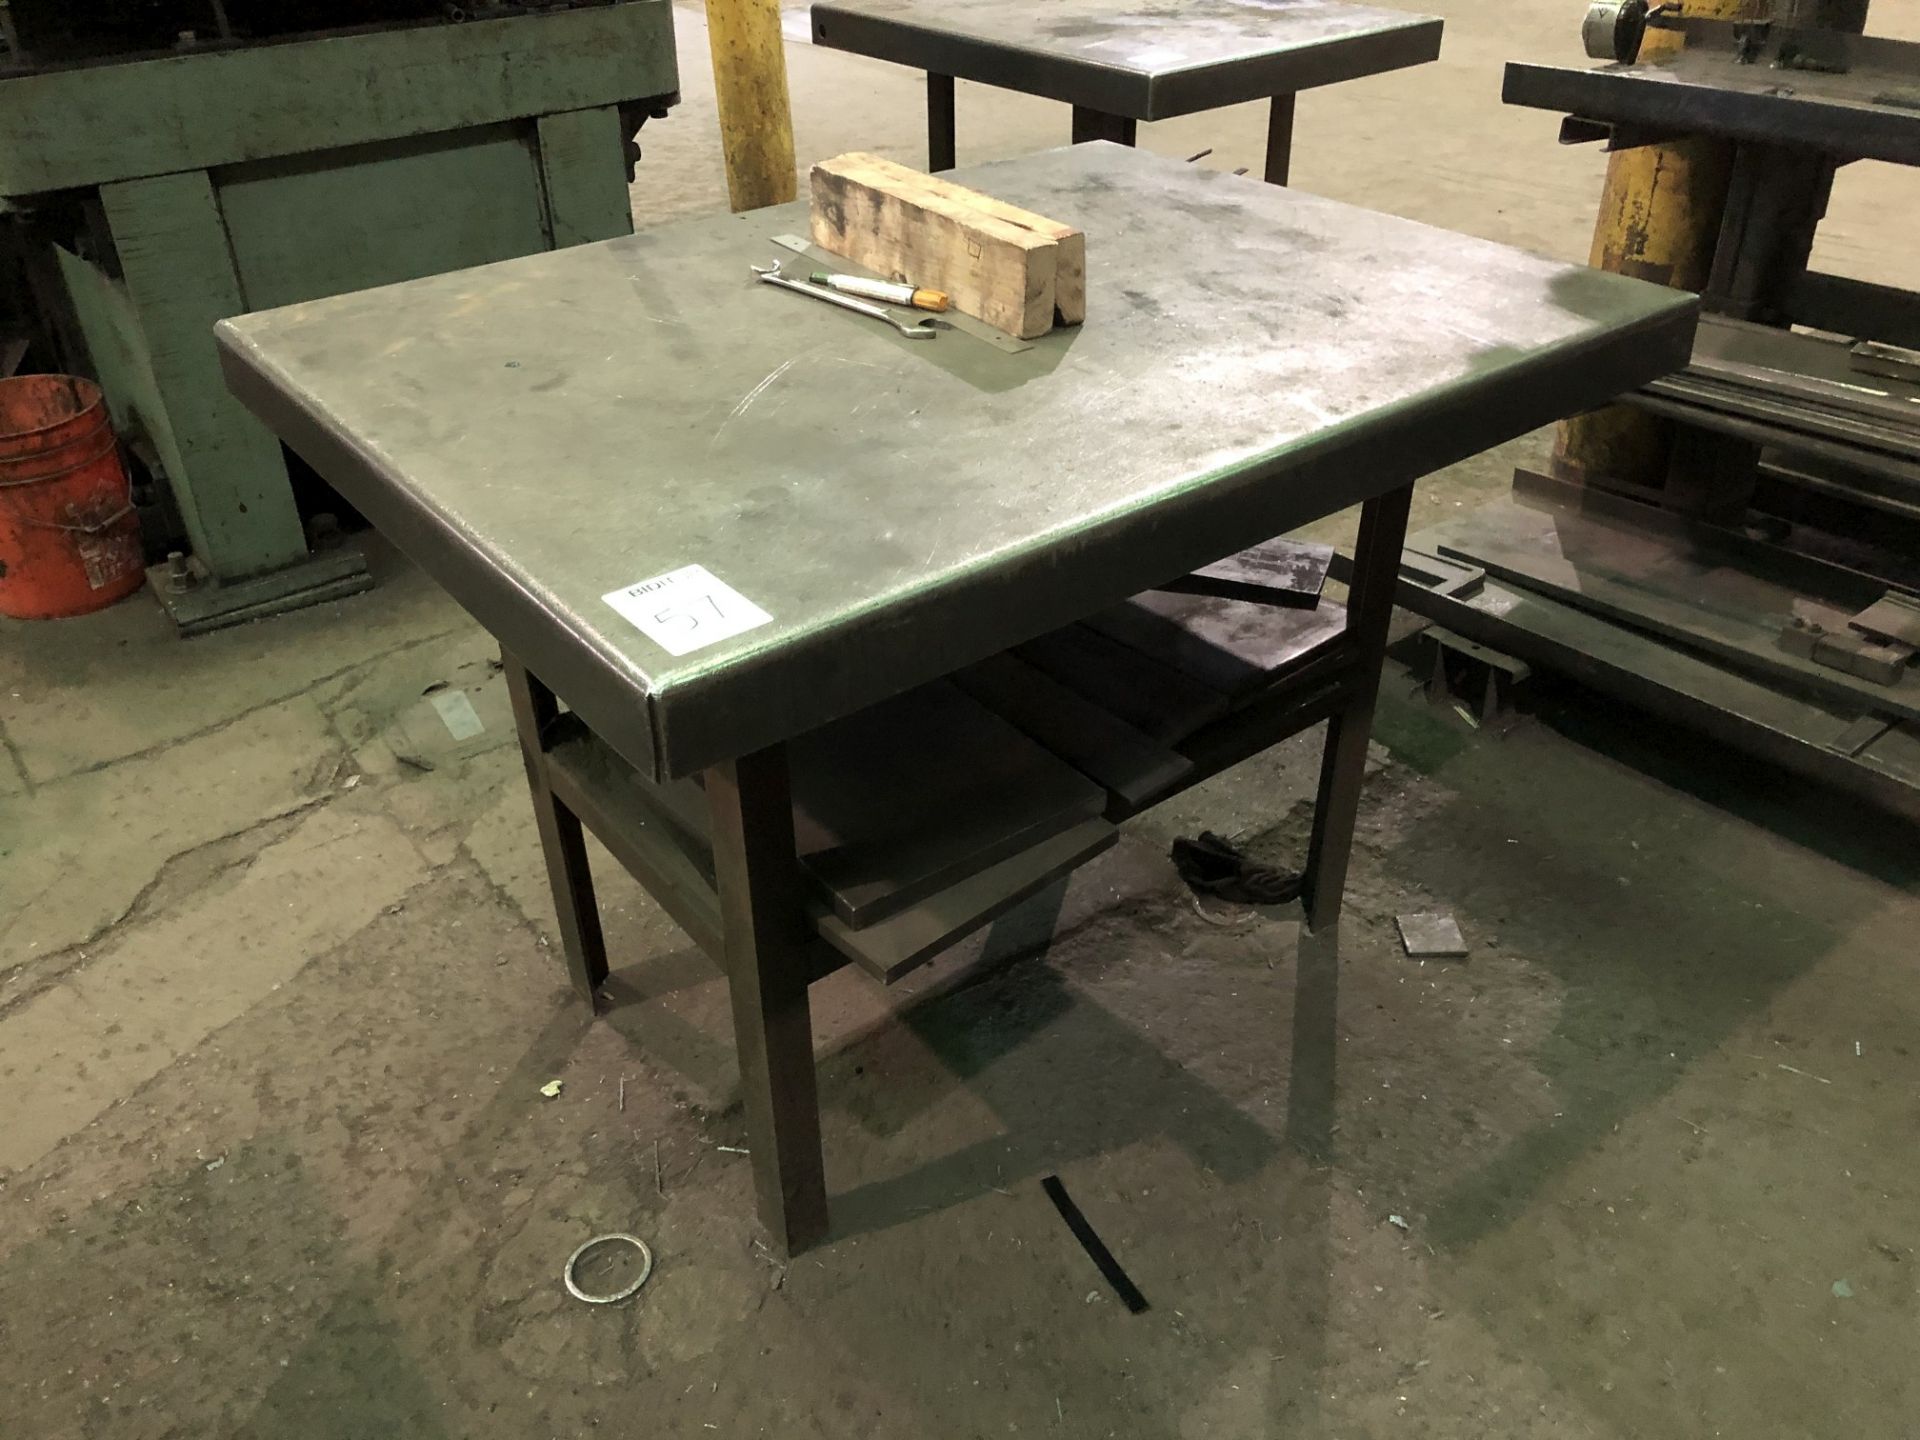 3' x 4' Metal Table (No Contents) [Located at 8830 Vineyard Avenue, Rancho Cucamonga, CA 91730] - Image 2 of 2